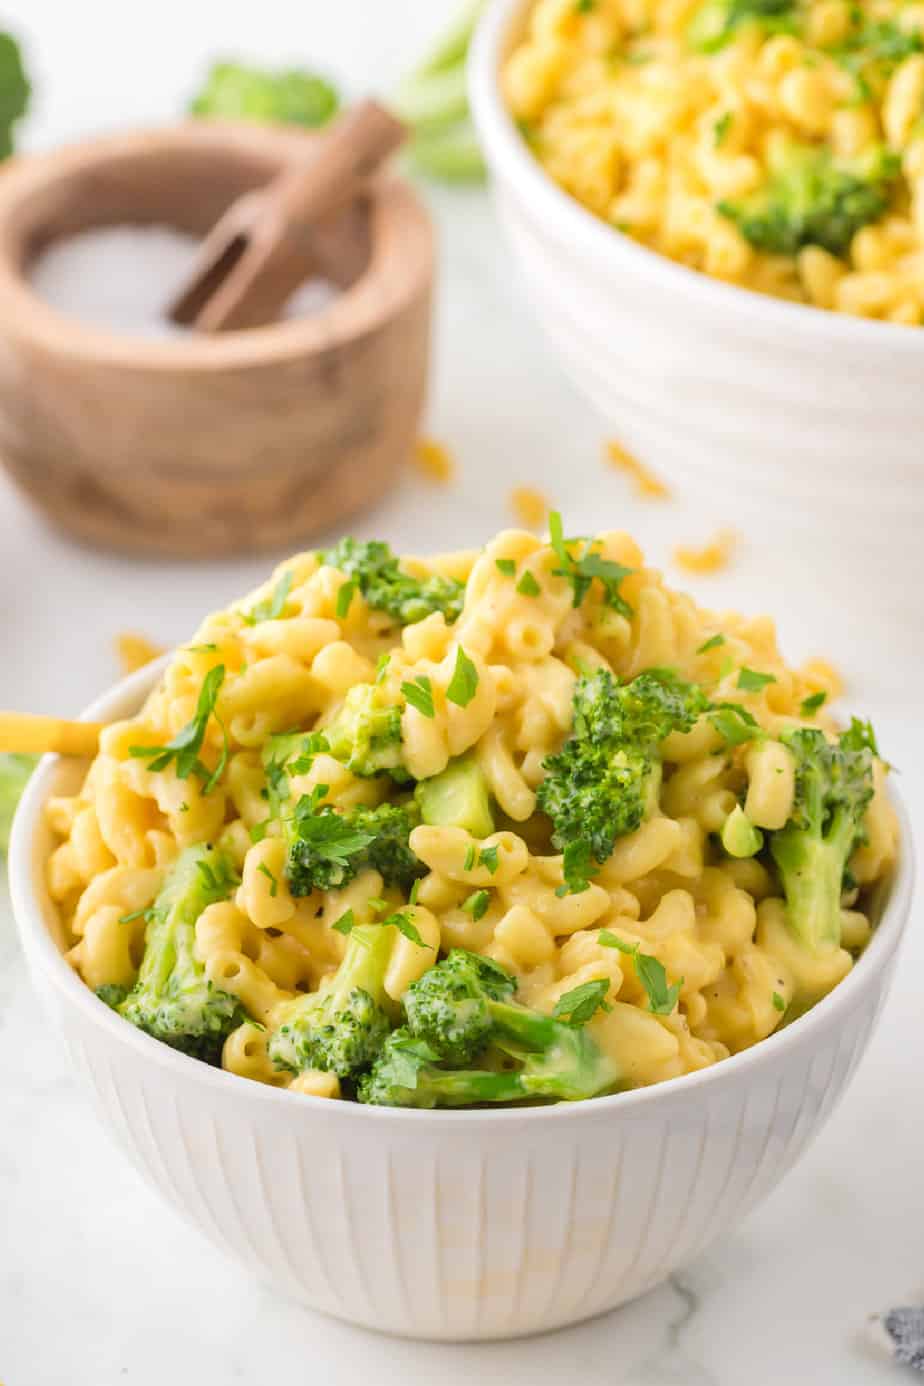 Macaroni and cheese with broccoli in a bowl on a counter with a serving bowl full of macaroni and cheese and a small bowl of salt in the background on the counter from behind.